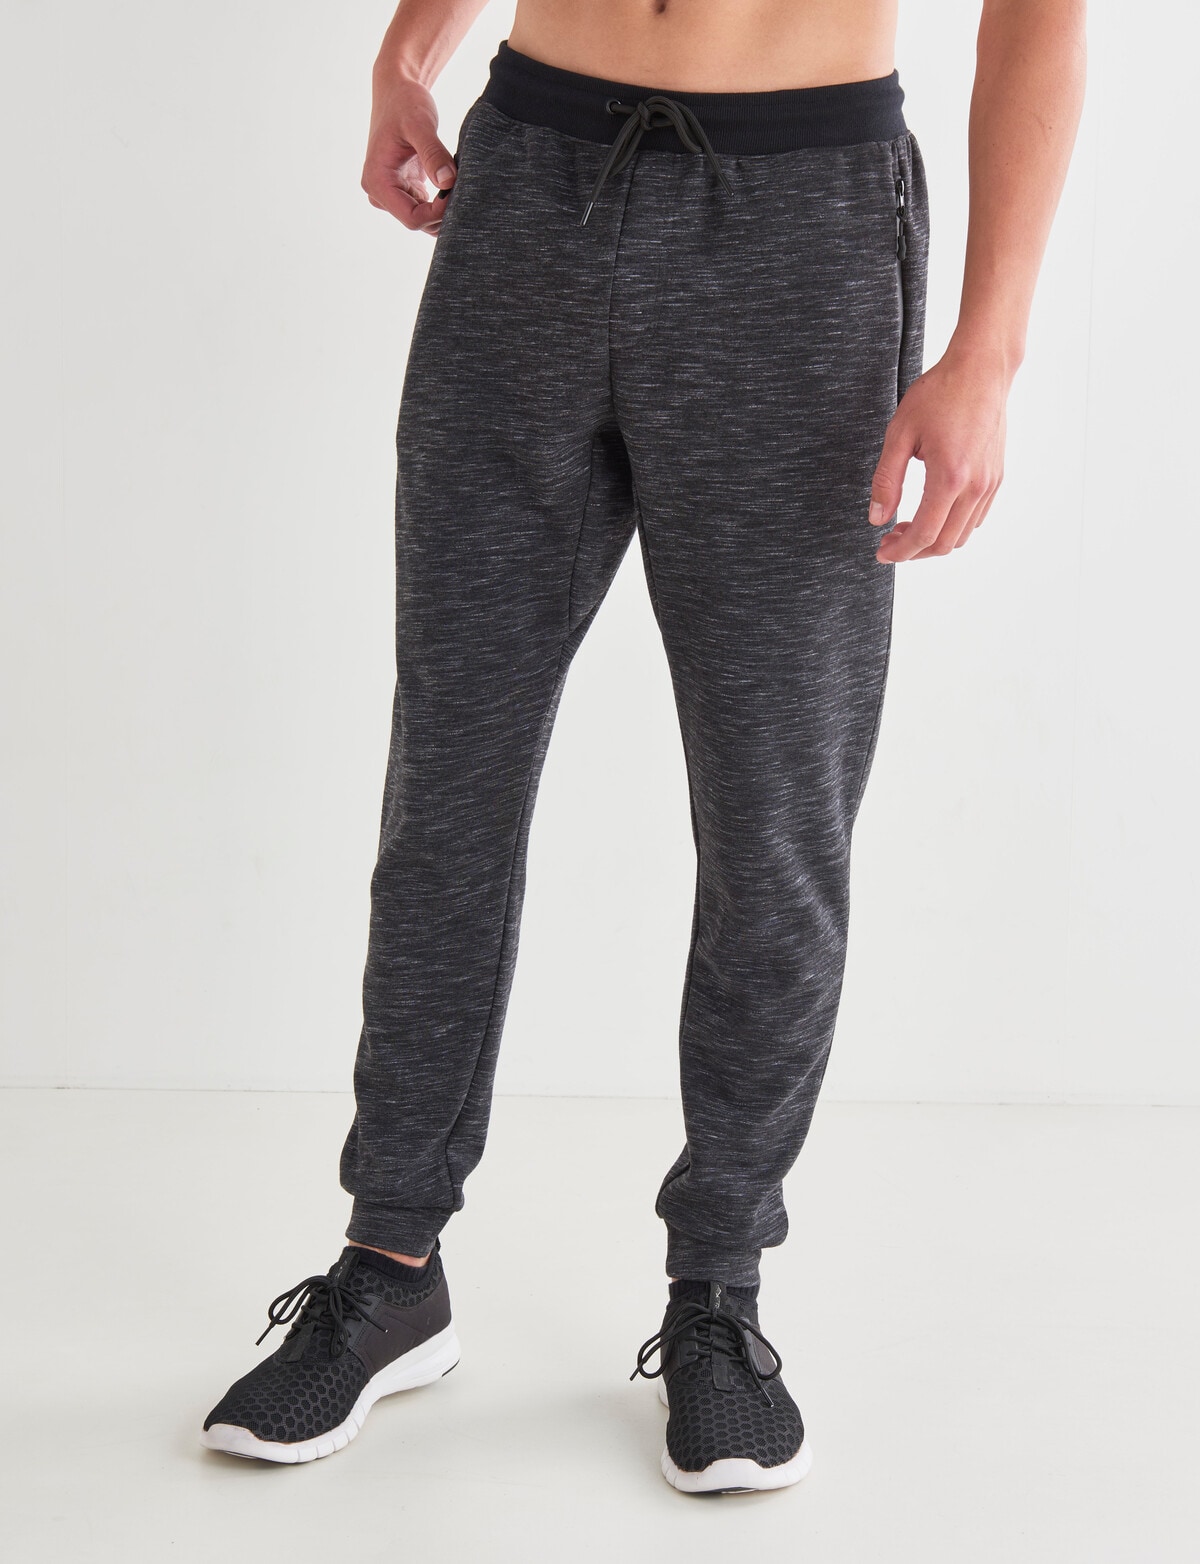 Pewter Boon Sweatpants - - Charcoal - Primary - Sportiqe